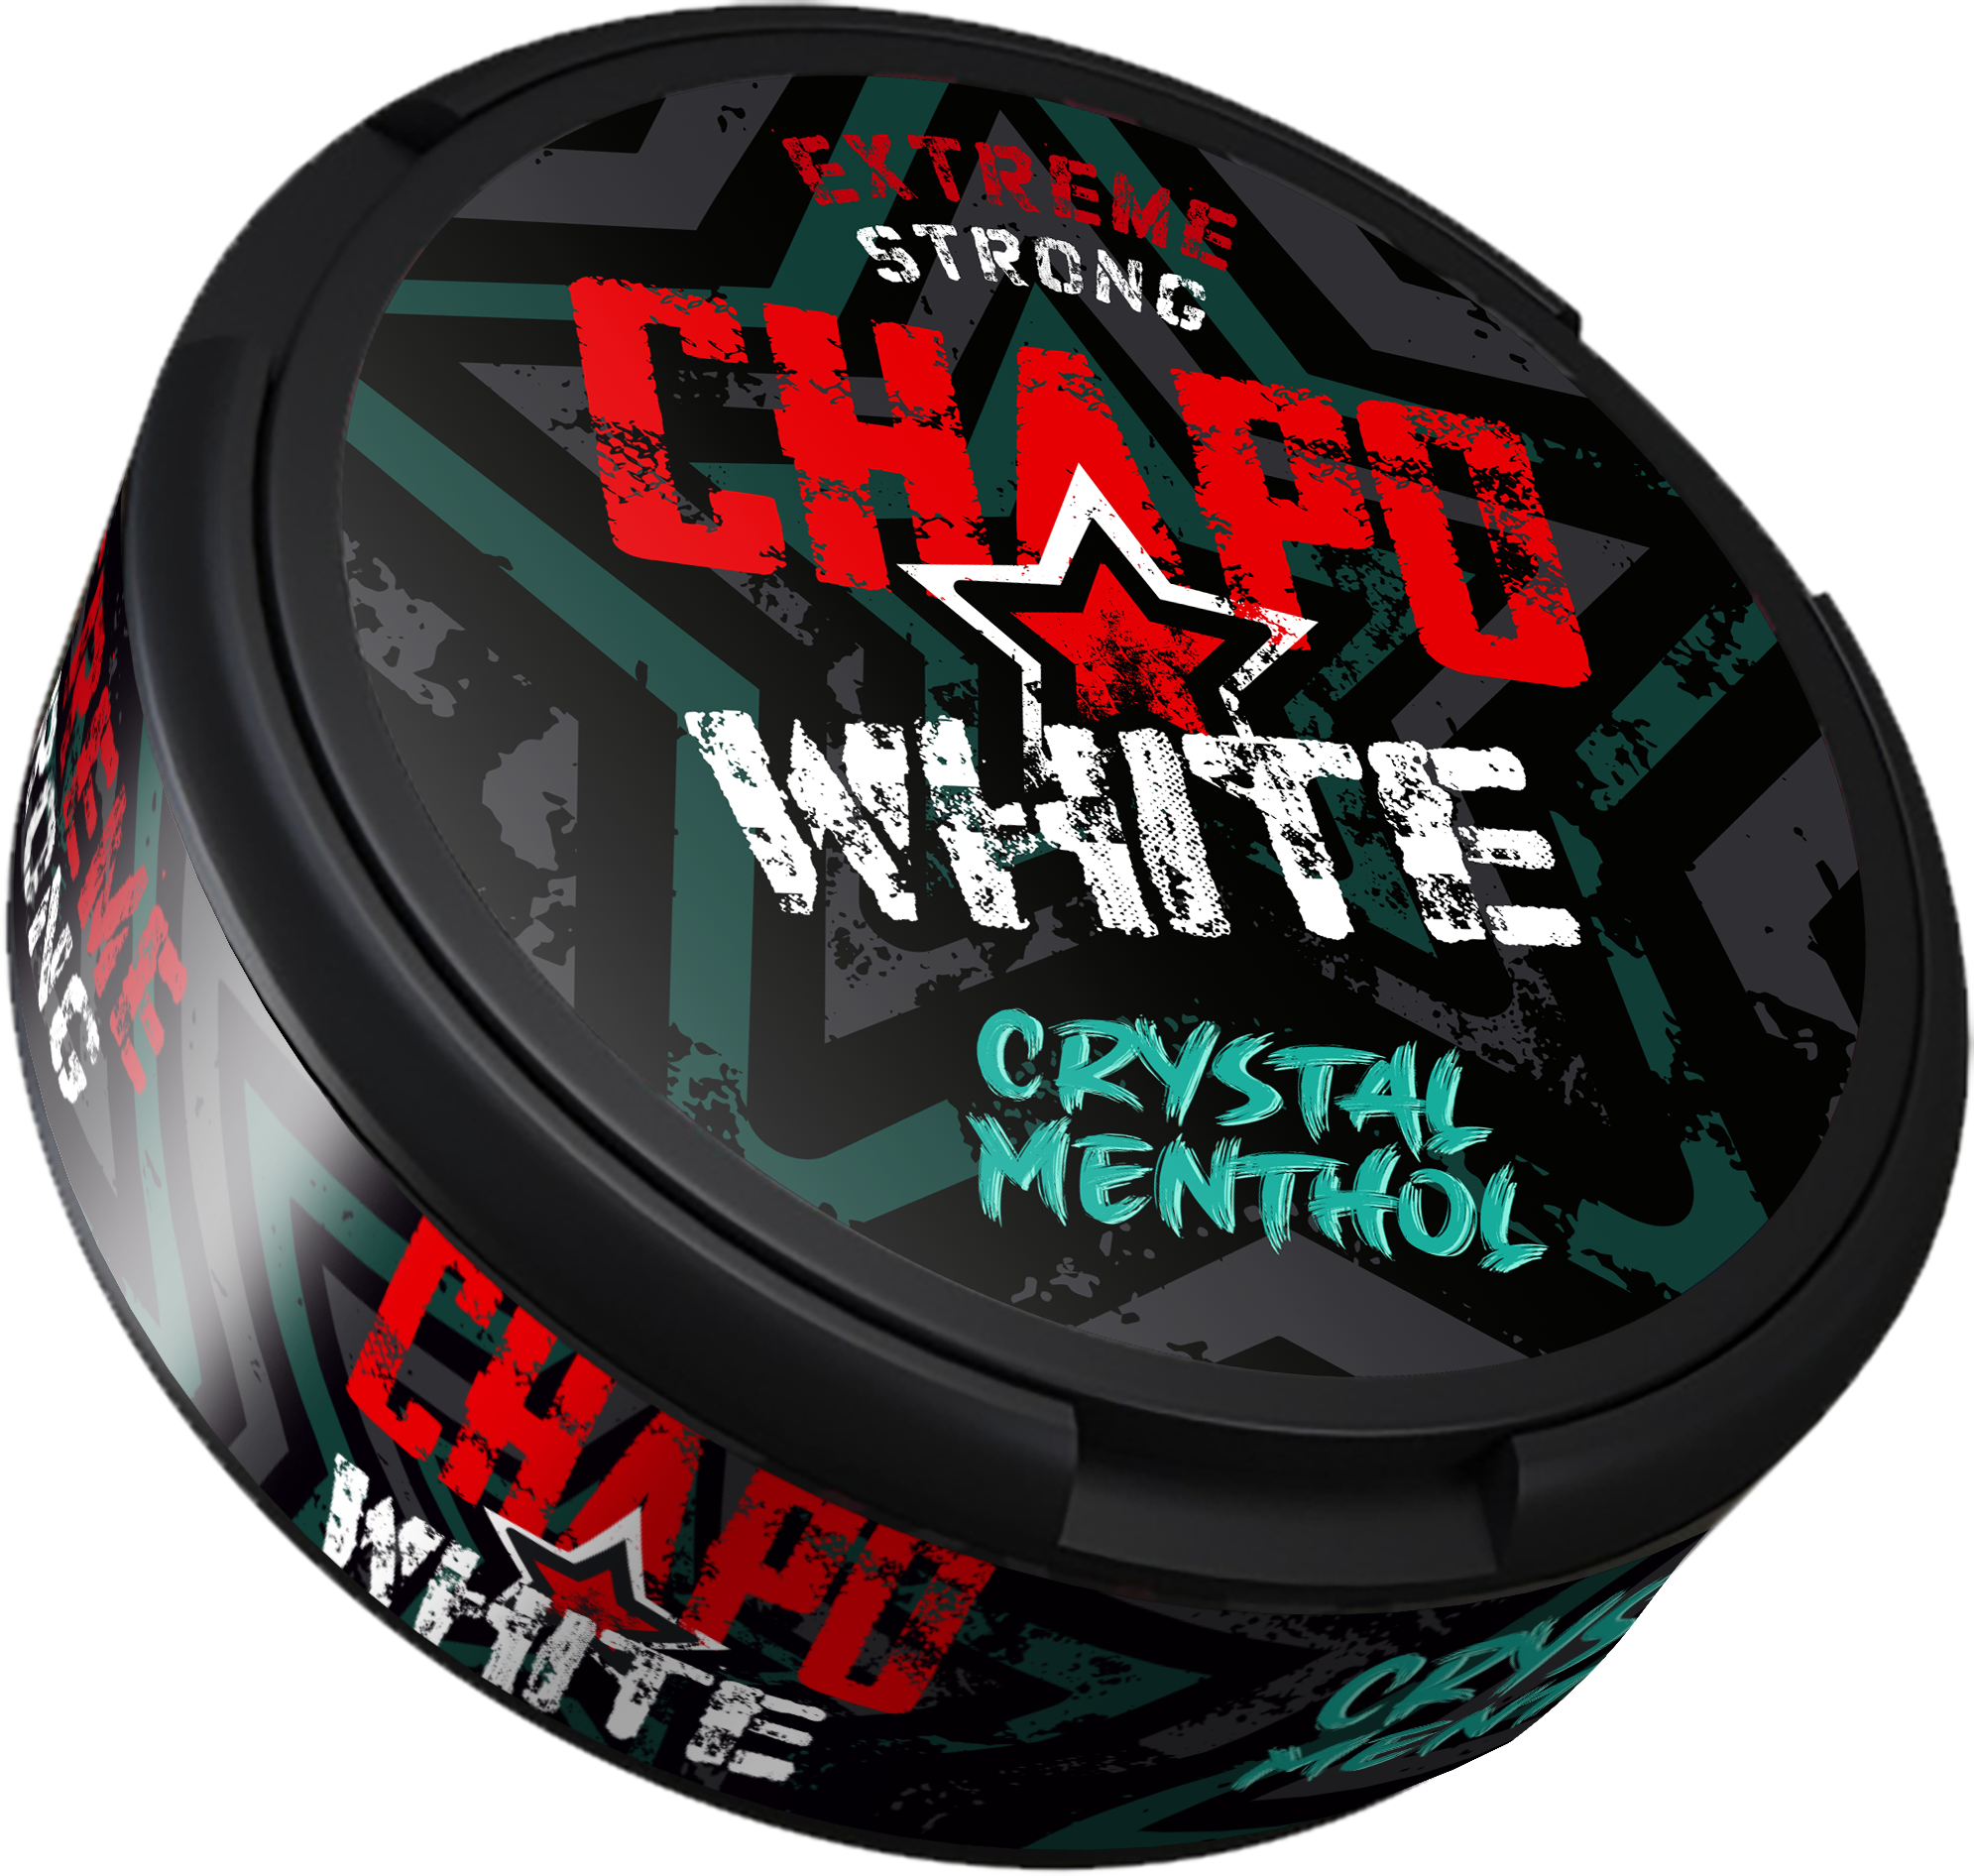 chapo-white_Crystal-Menthol_Strong